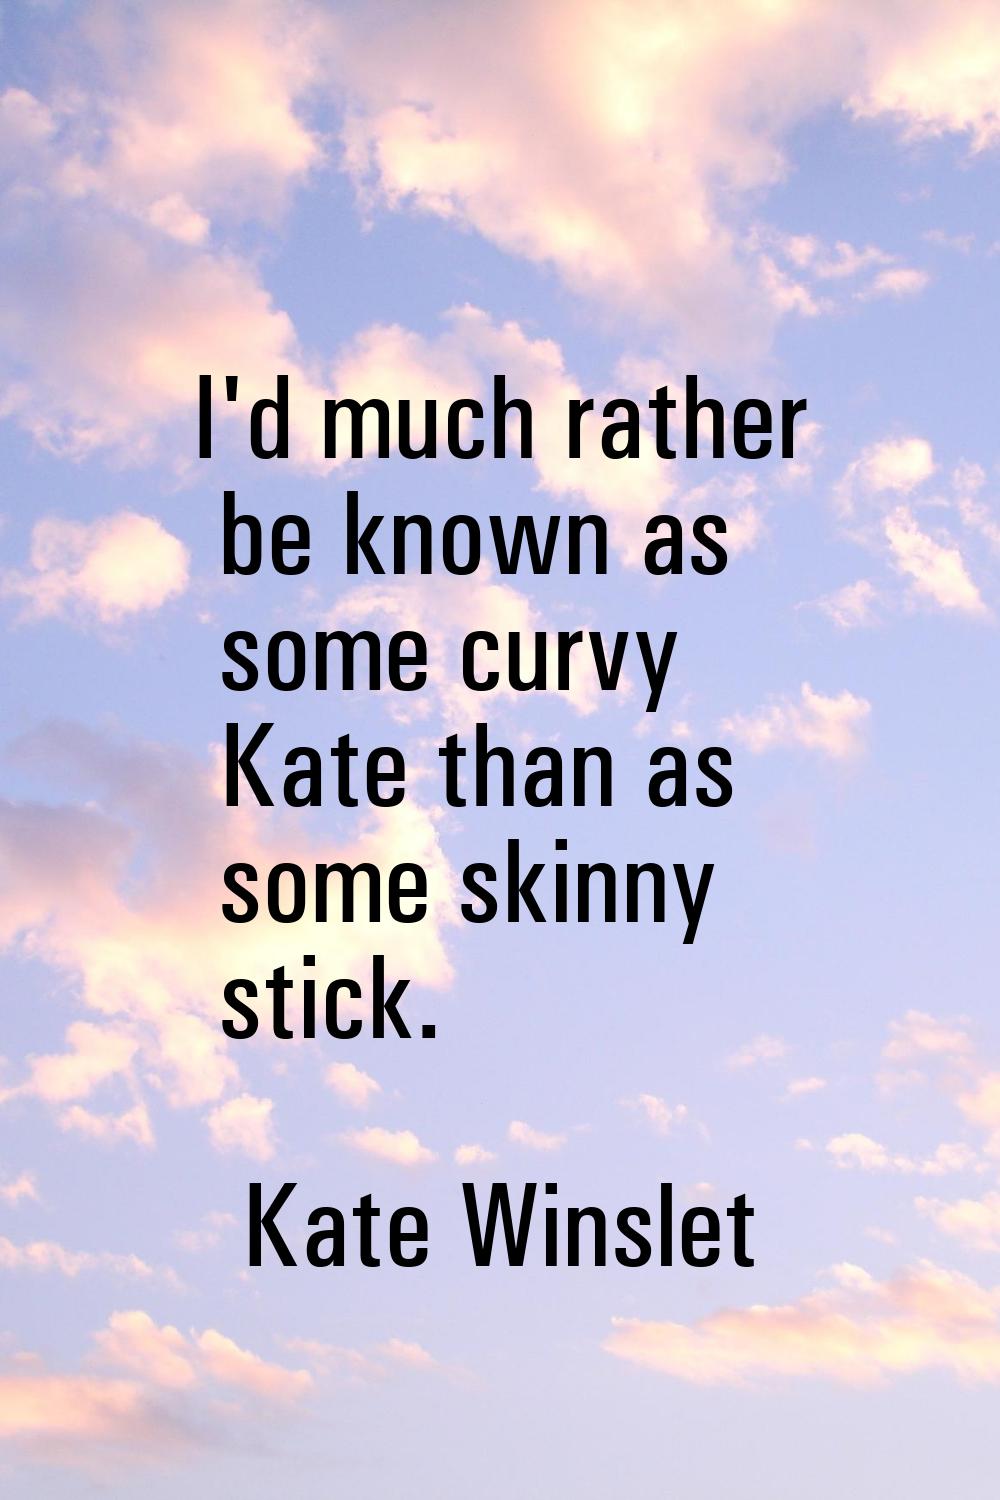 I'd much rather be known as some curvy Kate than as some skinny stick.